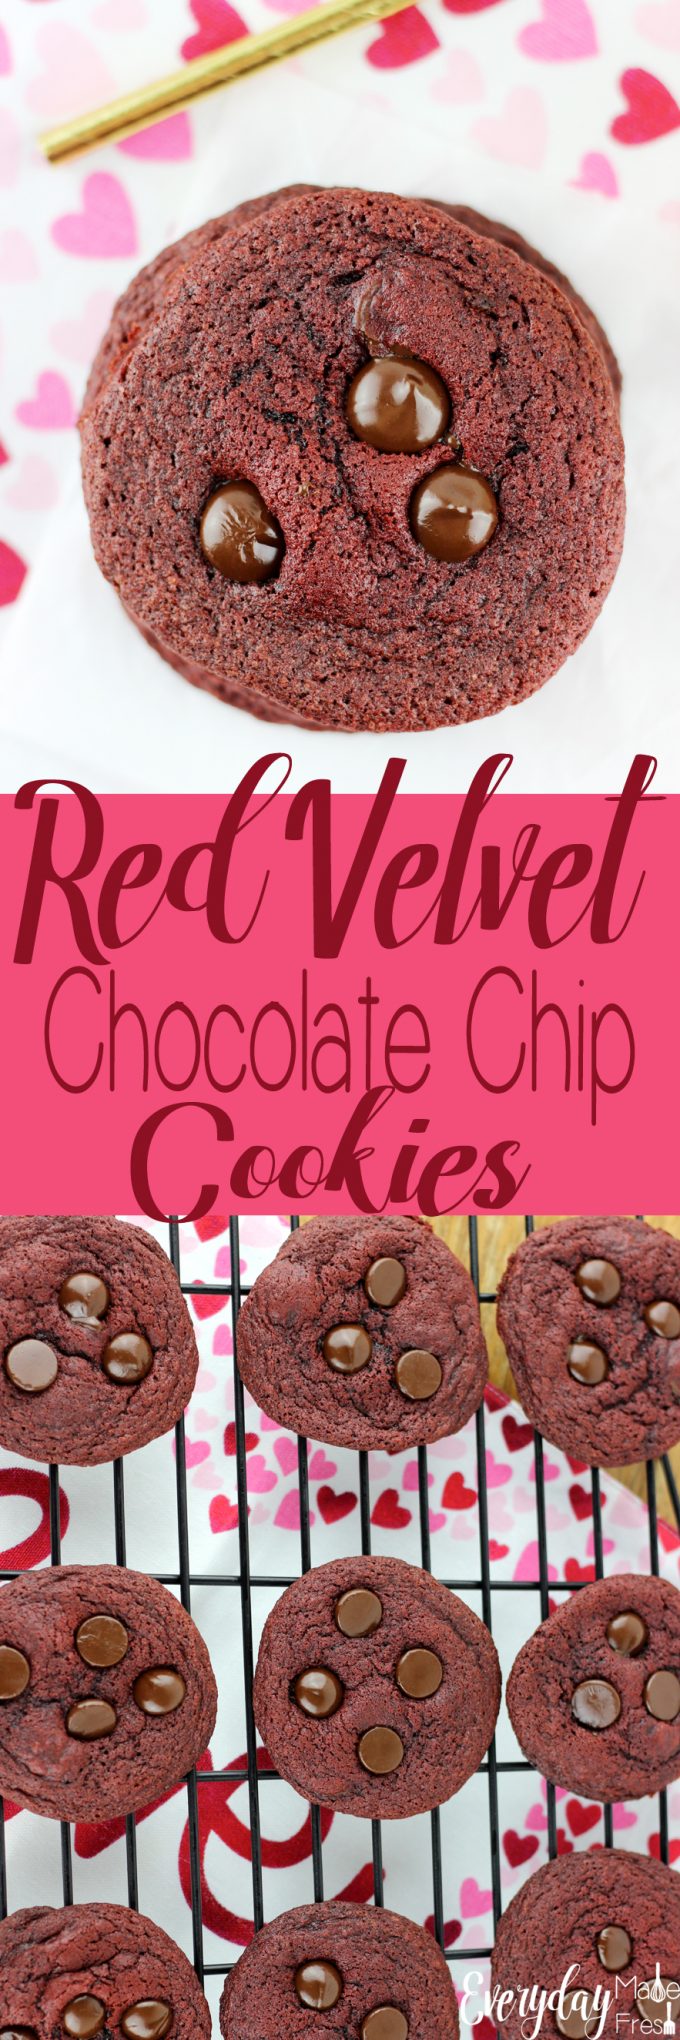 Just in time for Valentine's Day, these Red Velvet Chocolate Chip Cookies are rich, and loaded with dark chocolate chips! | EverydayMadeFresh.com